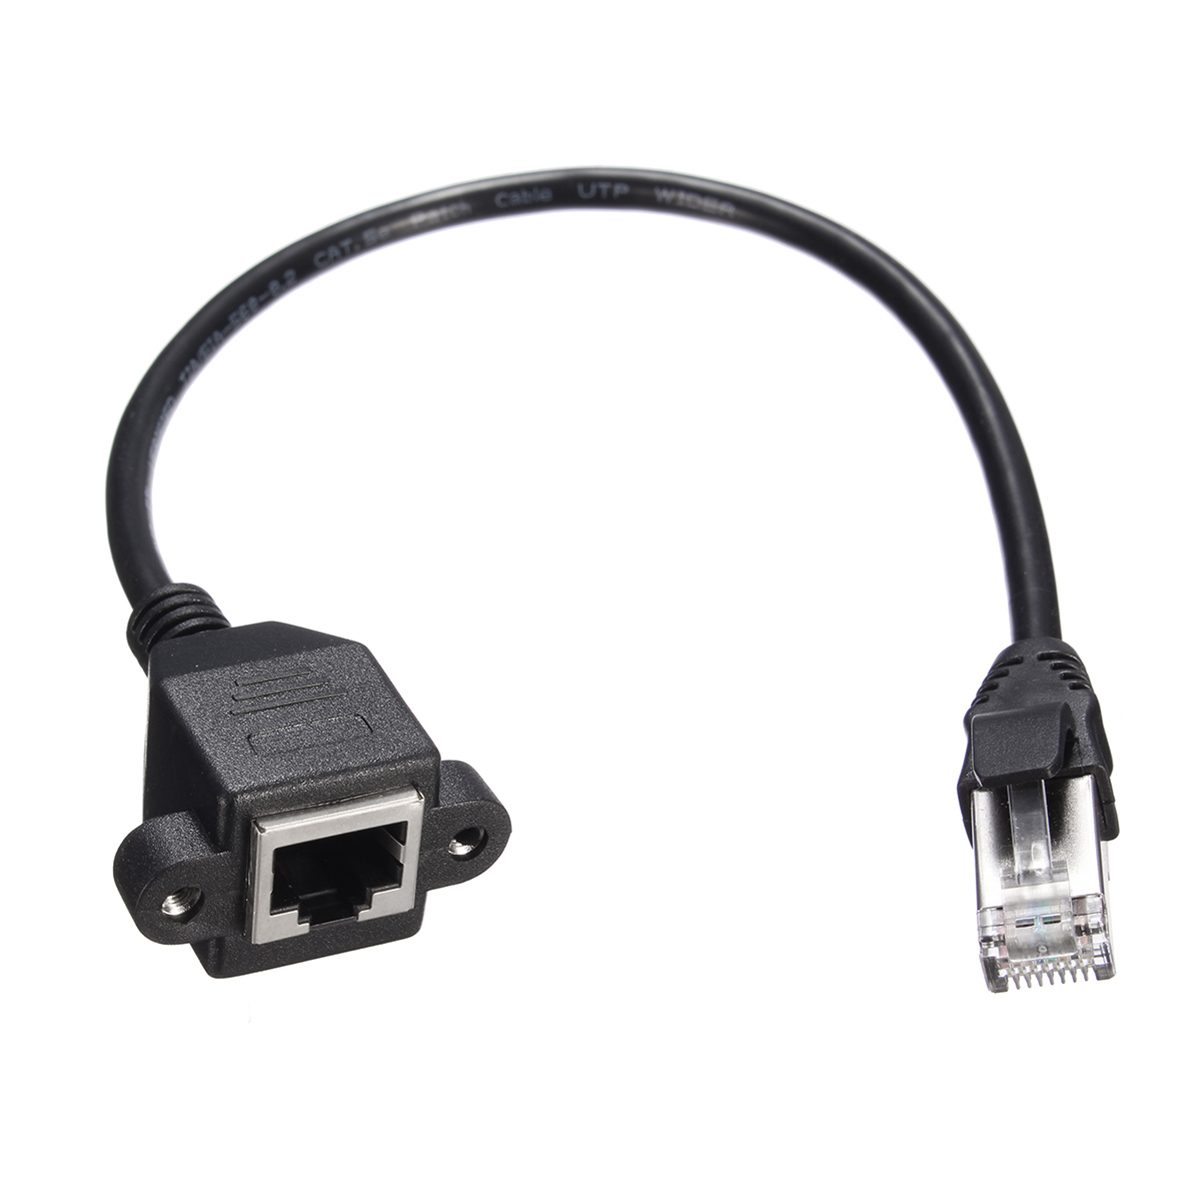 30cm/1M RJ45 Cable Male to Female Screw Panel Mount Ethernet LAN Network Extension Cable 11